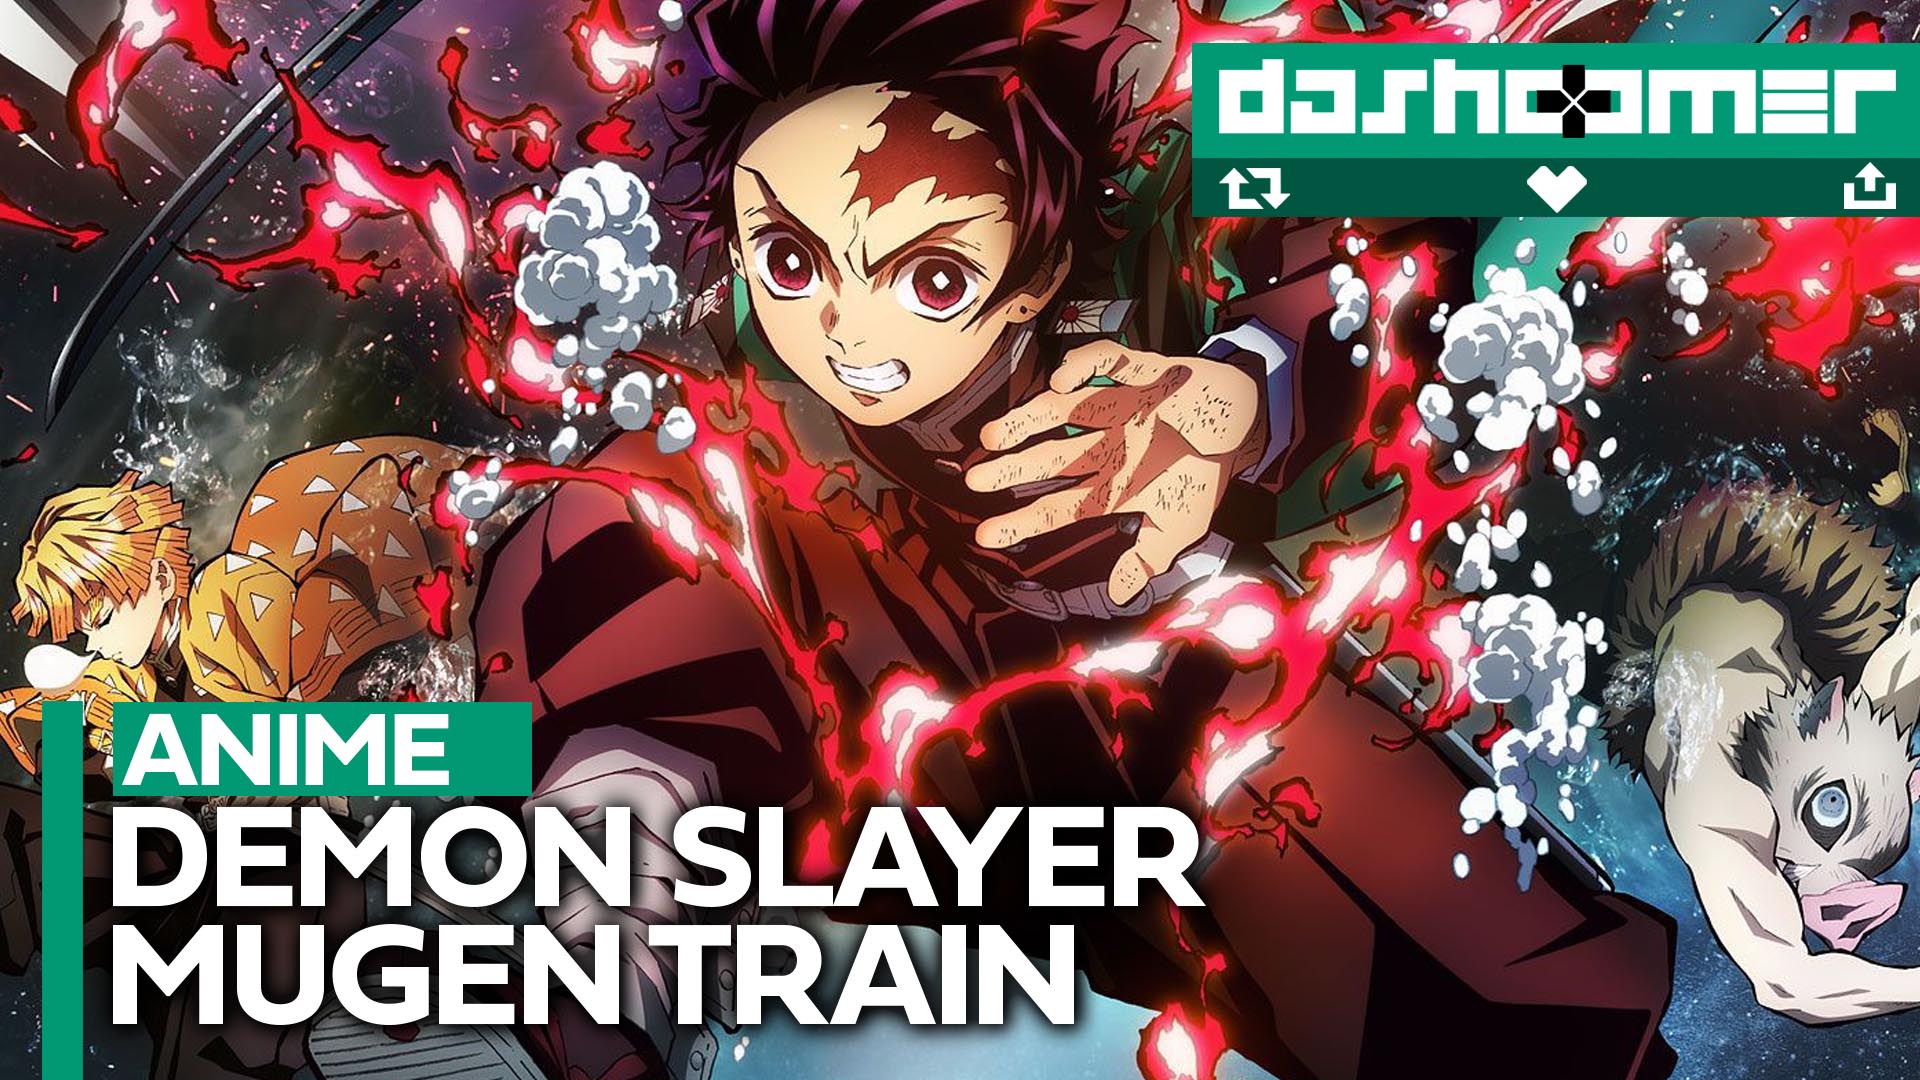 Demon Slayer: Mugen Train Topples Spirited Away to Become the